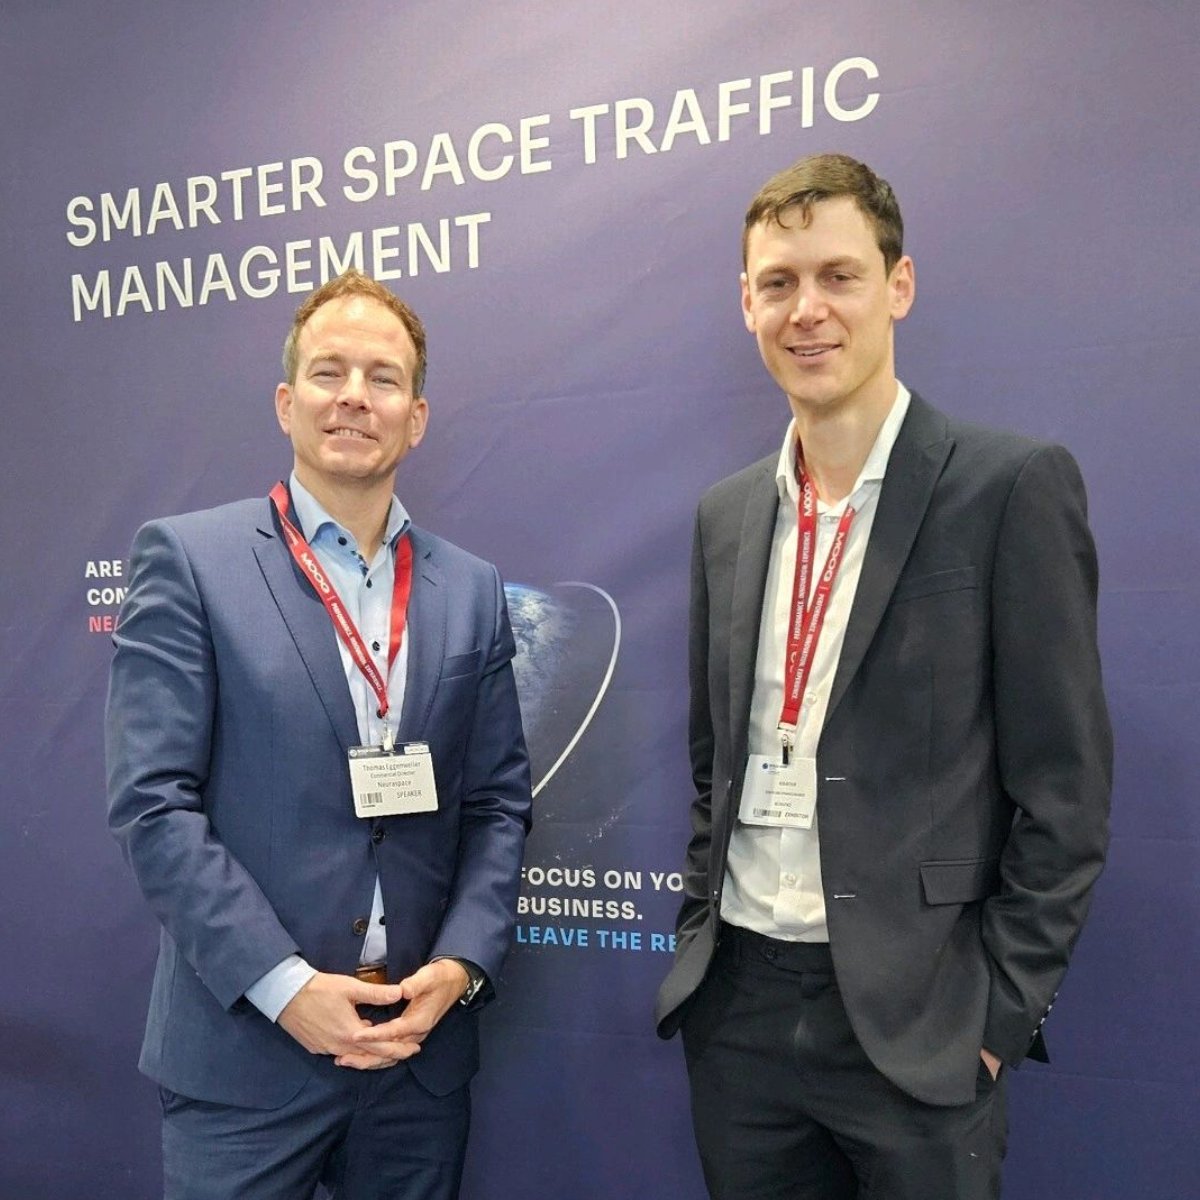 Are you at the Space-Comm Expo? Visit our stand F23 for a chat with Thomas Eggenweiler and Robert Arthur.

Let's get the conversation started.

#spacecommexpo2024 #spacecommexpo #spaceevents #spaceexpo #Neuraspace #spacetrafficmanagement #STM #spacedebris